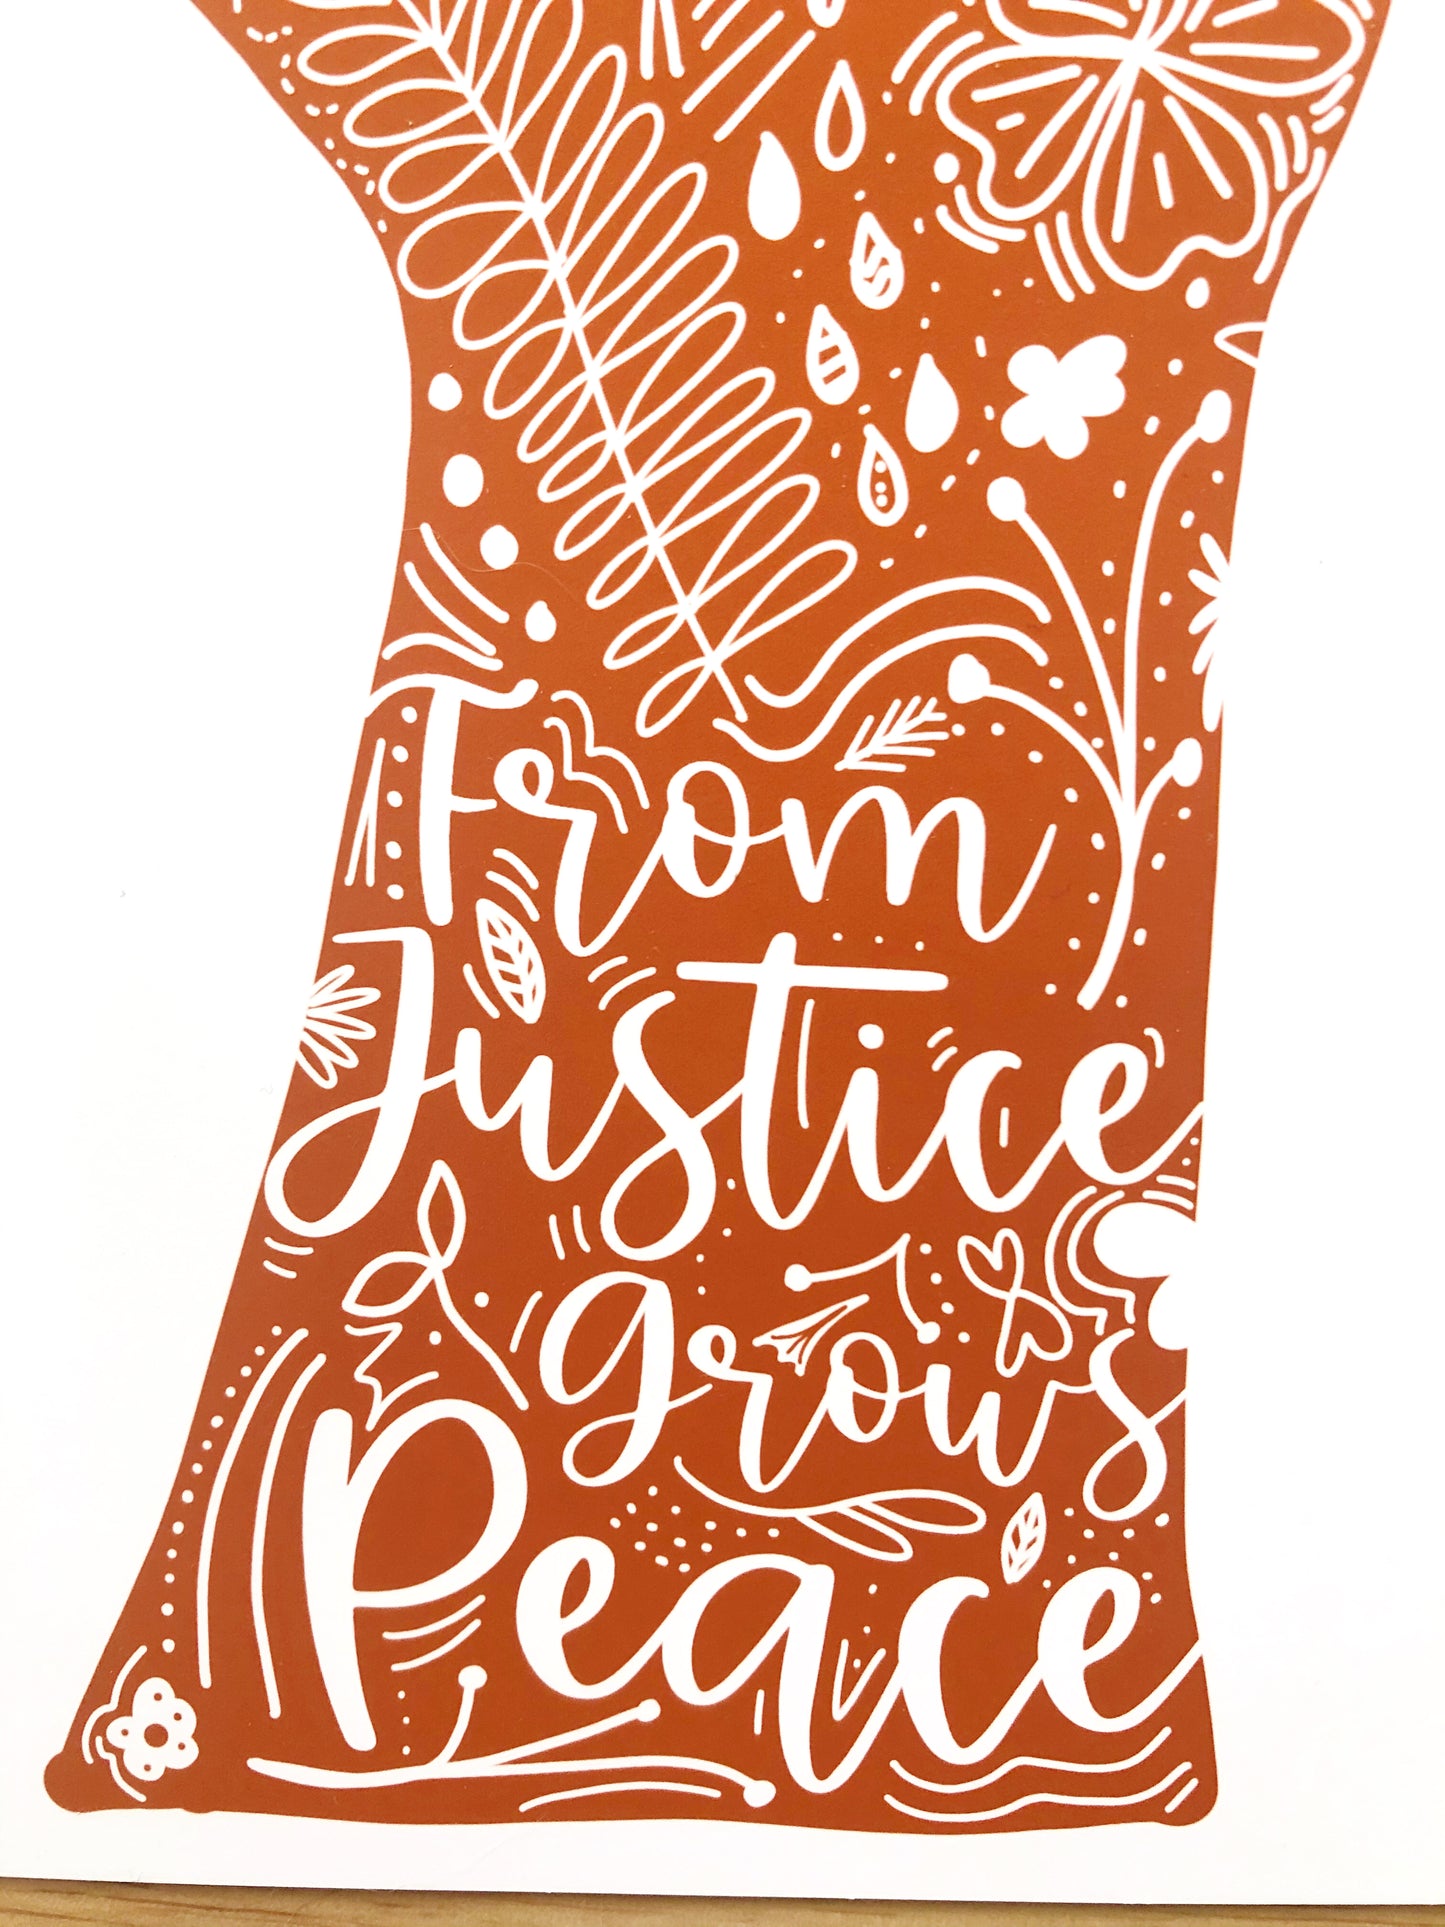 From Justice Grows Peace Print